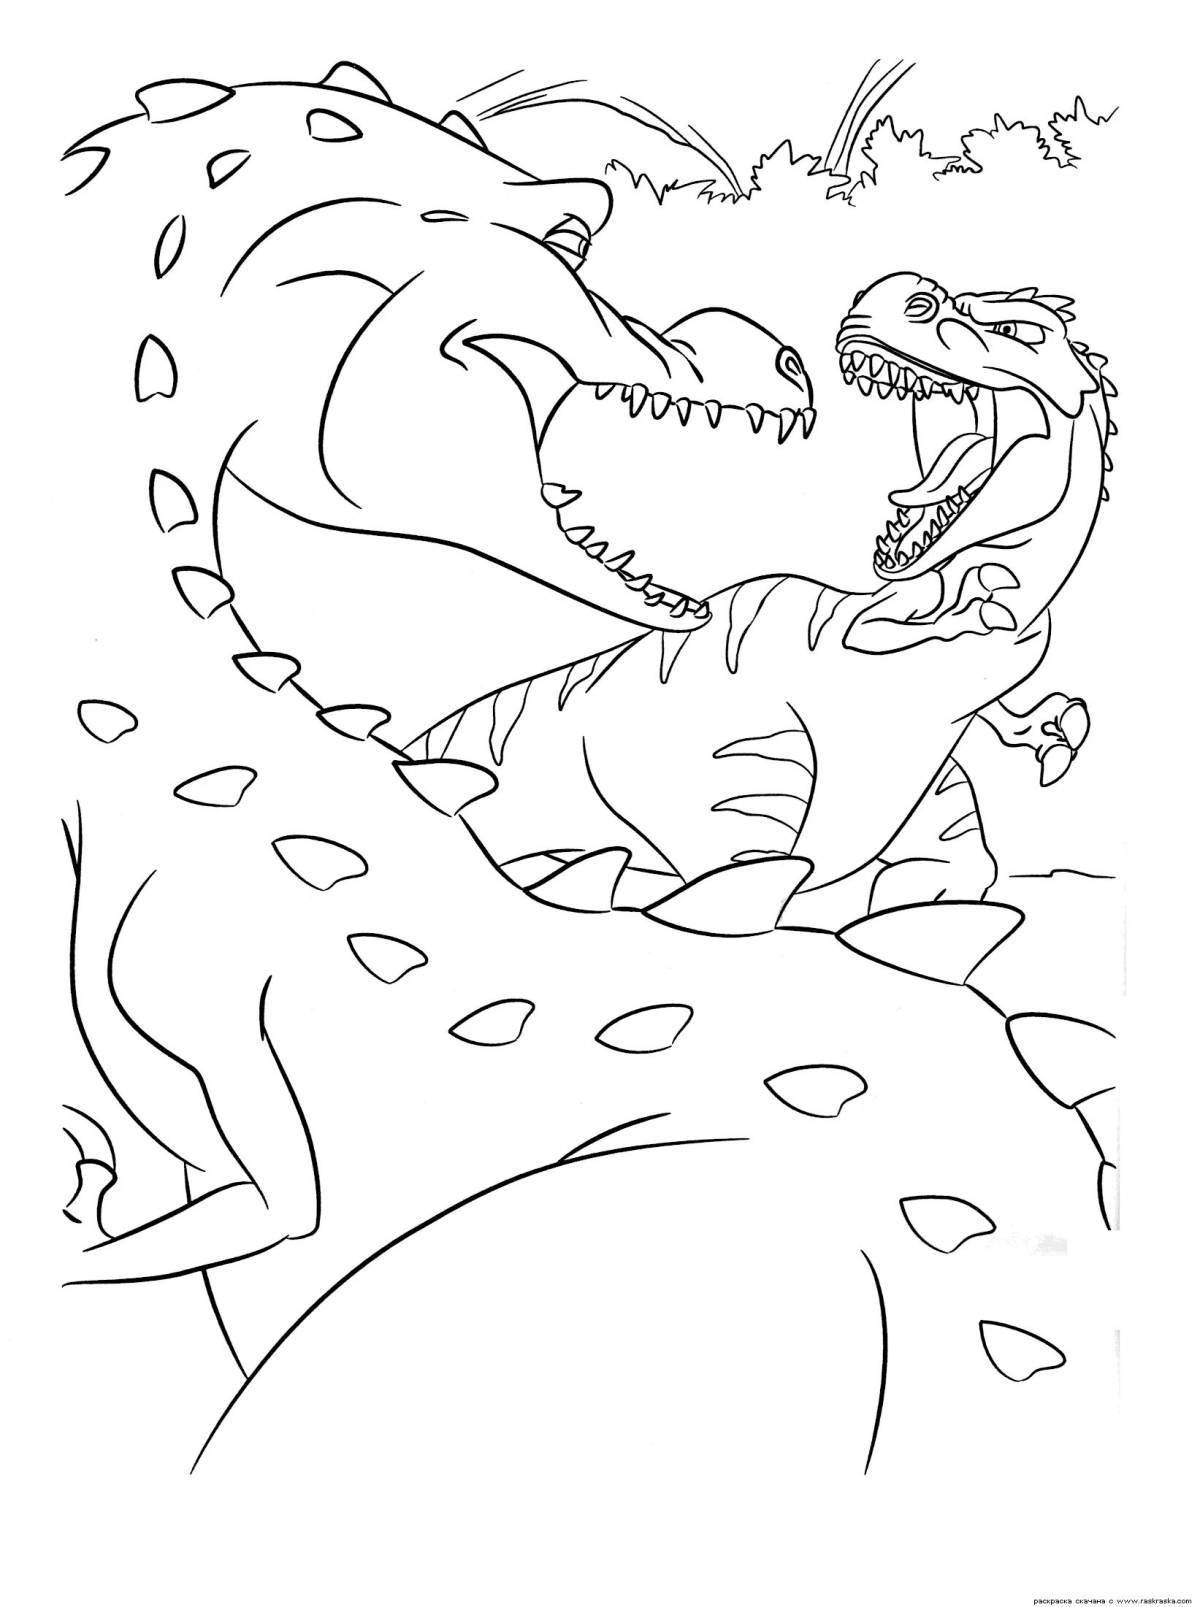 Incredible ice age dinosaur time coloring book